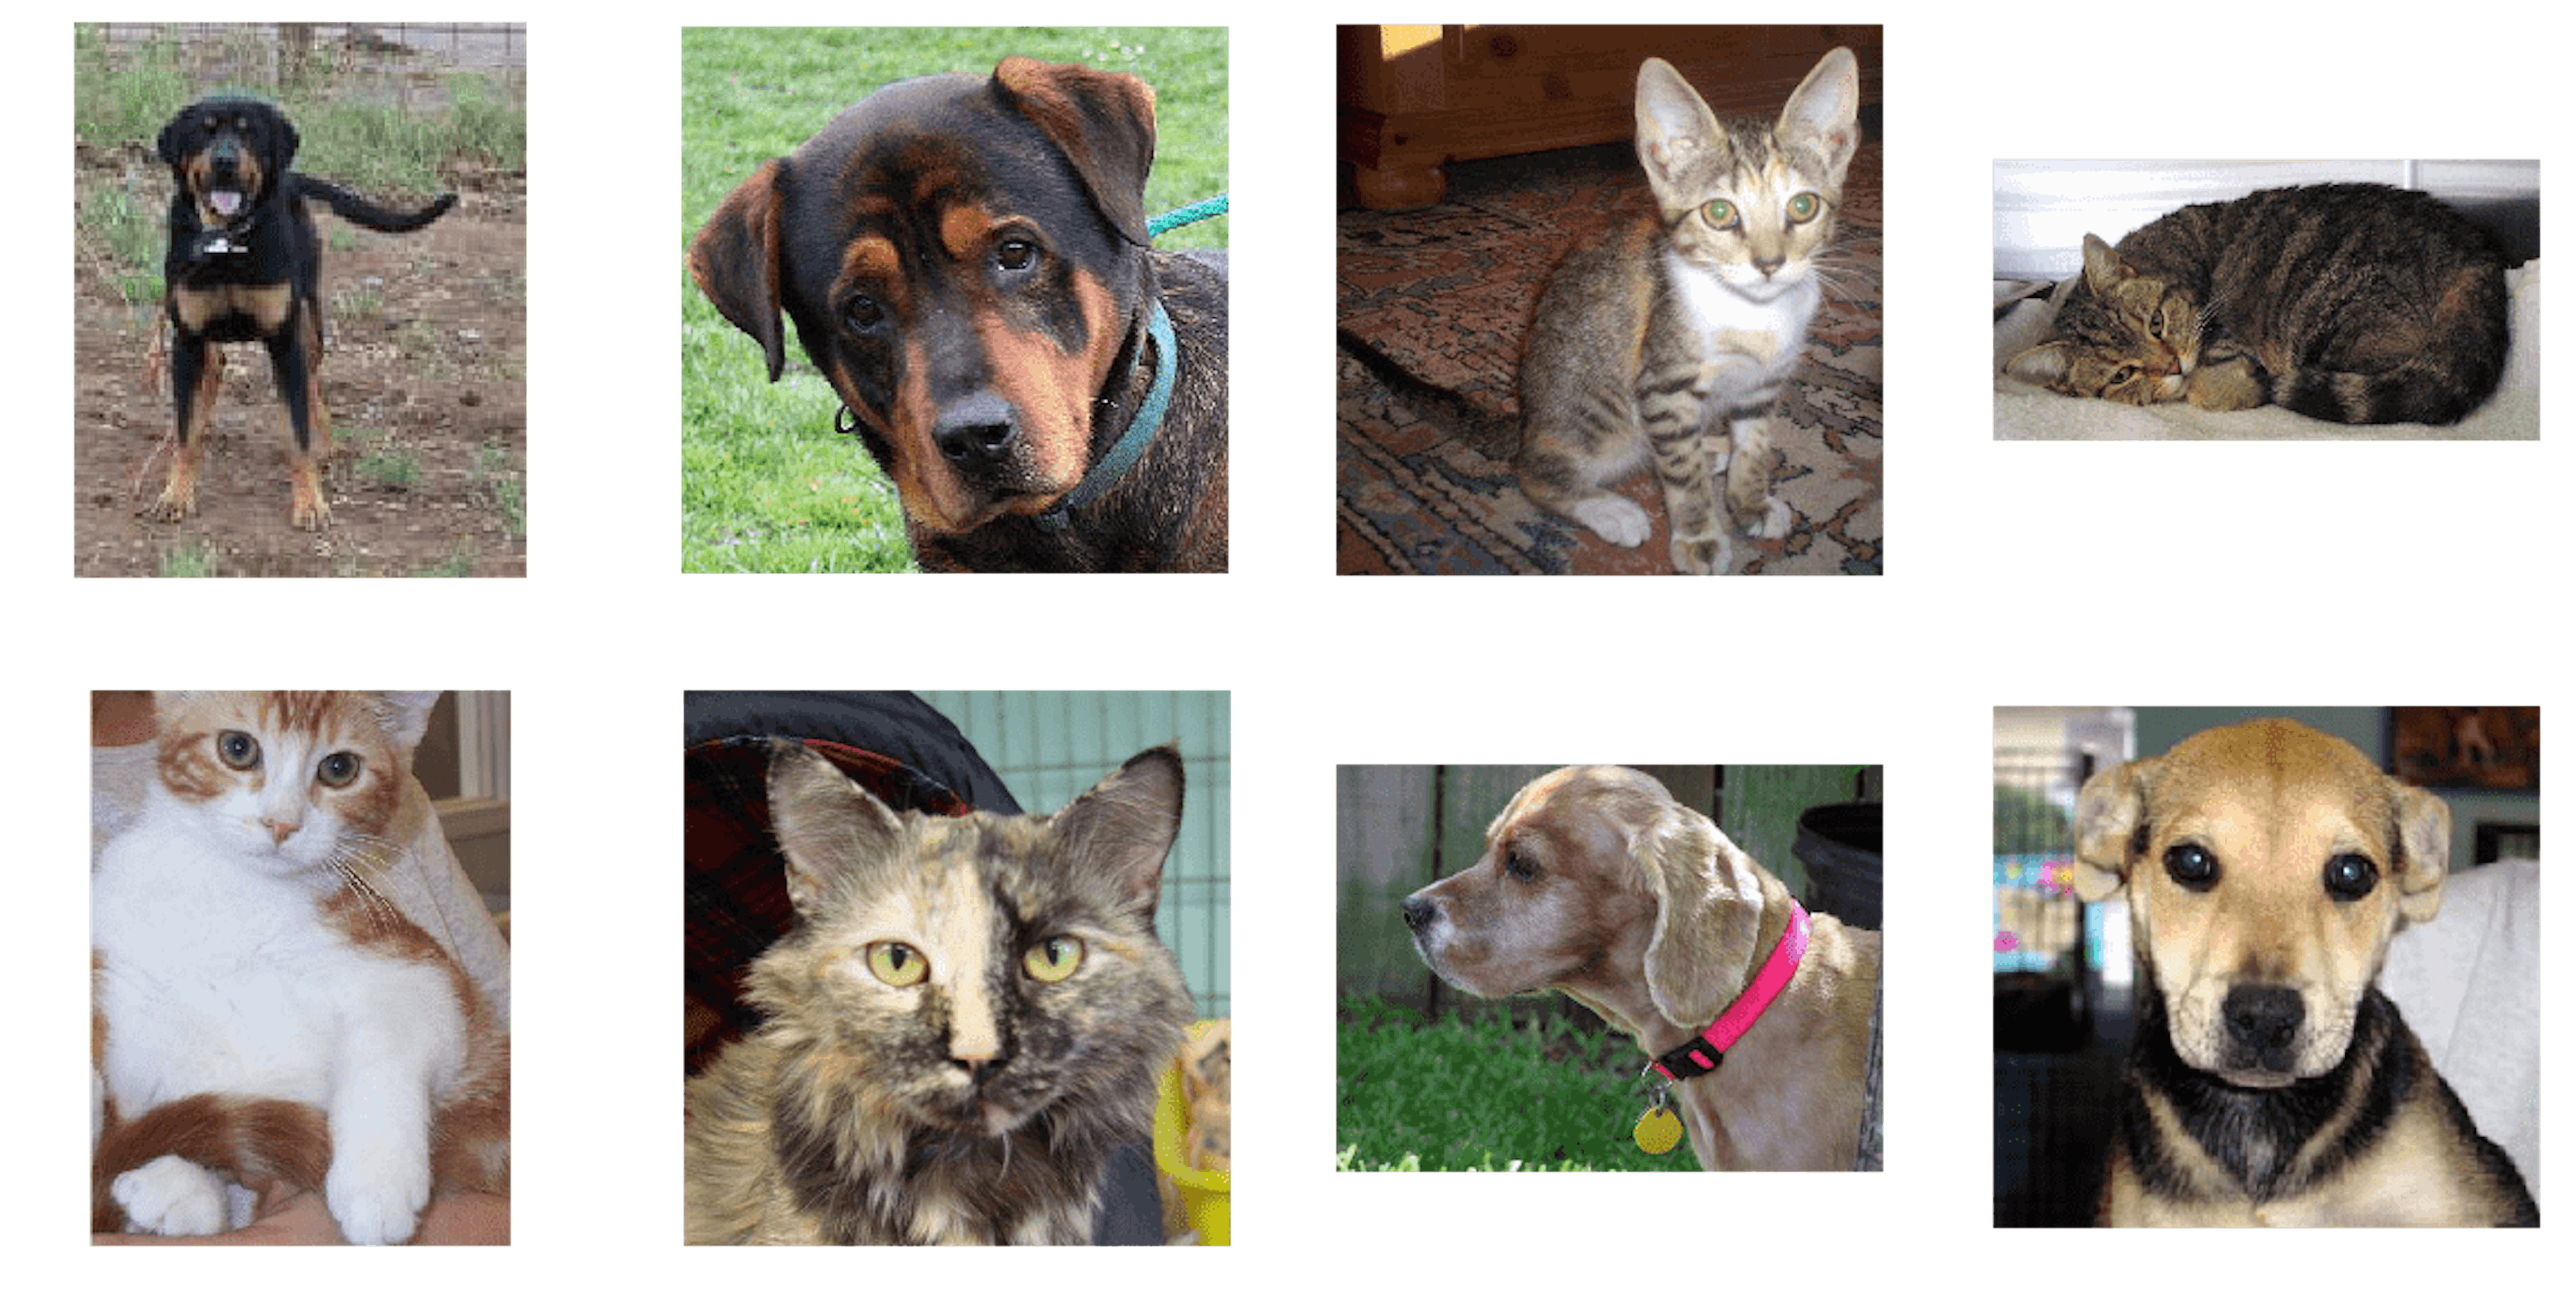 Dogs vs Cats images